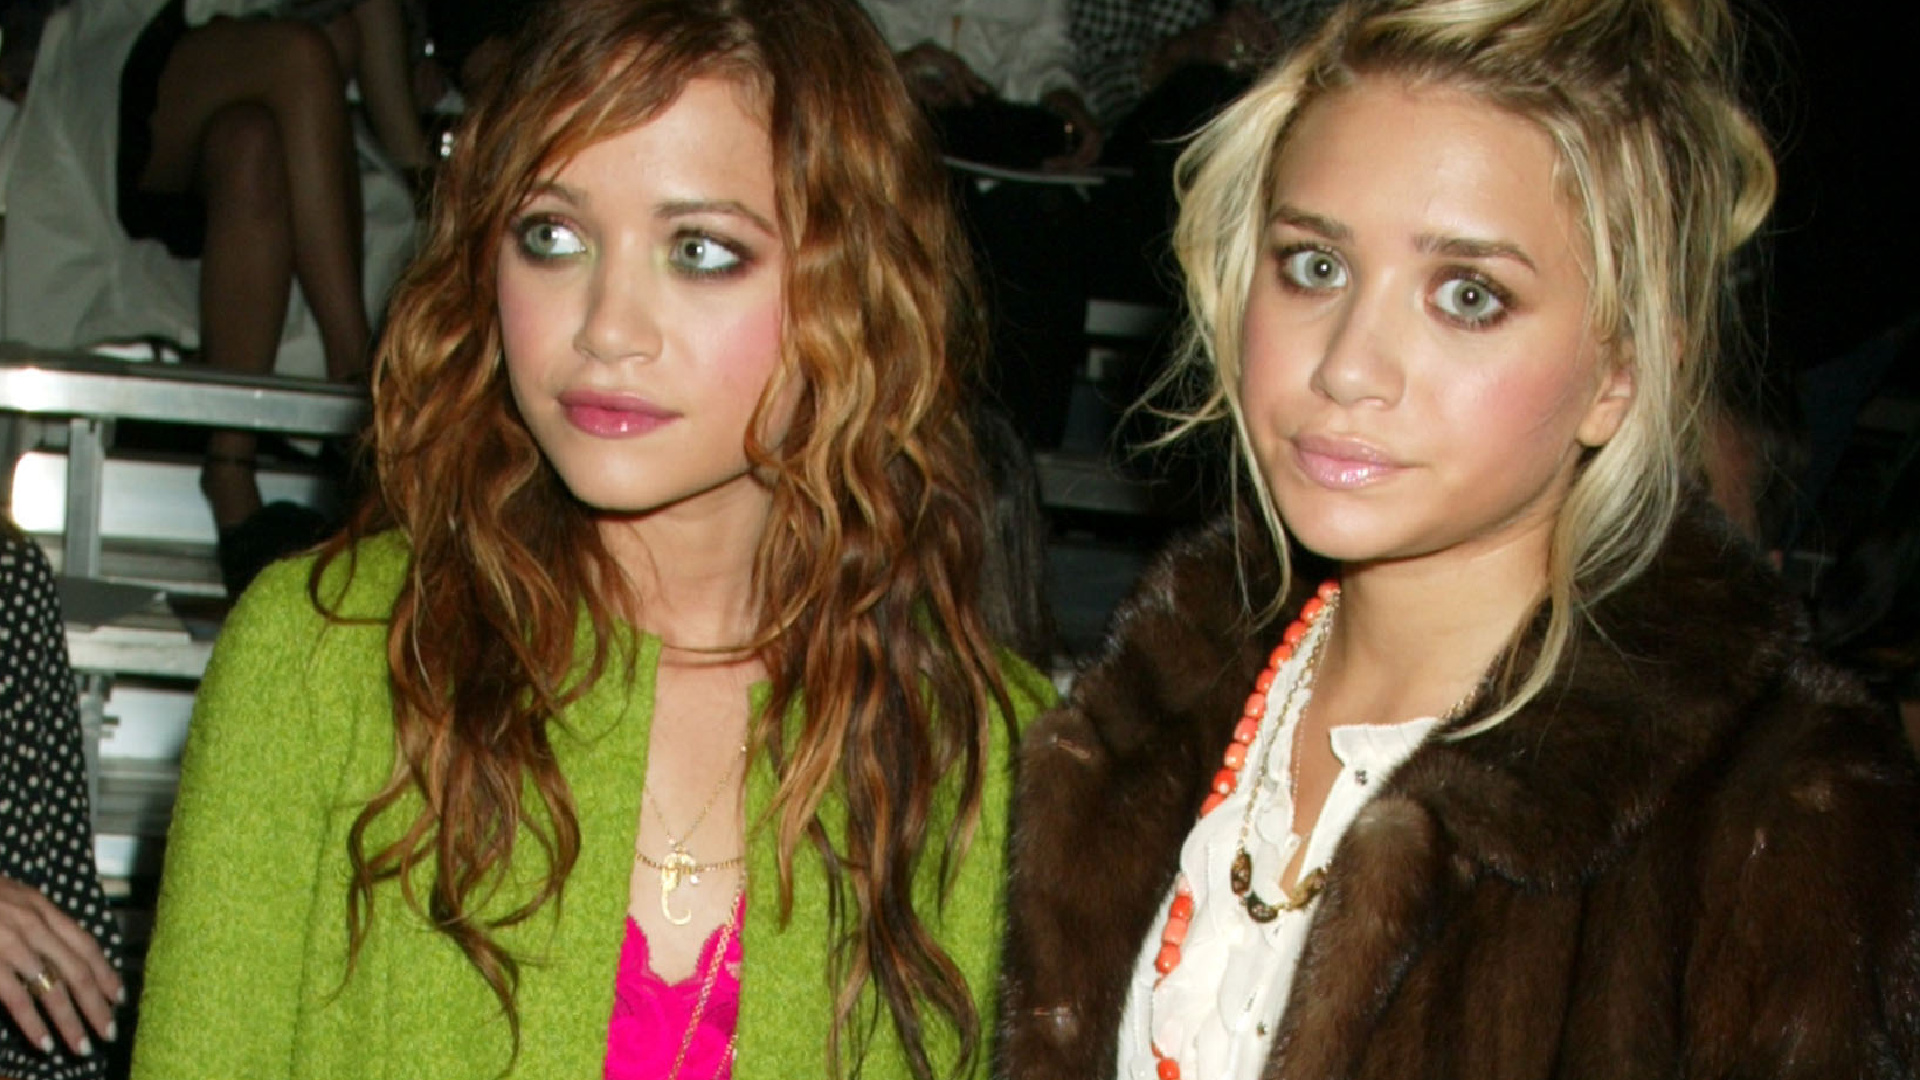 The 2000s also belonged to the Olsens